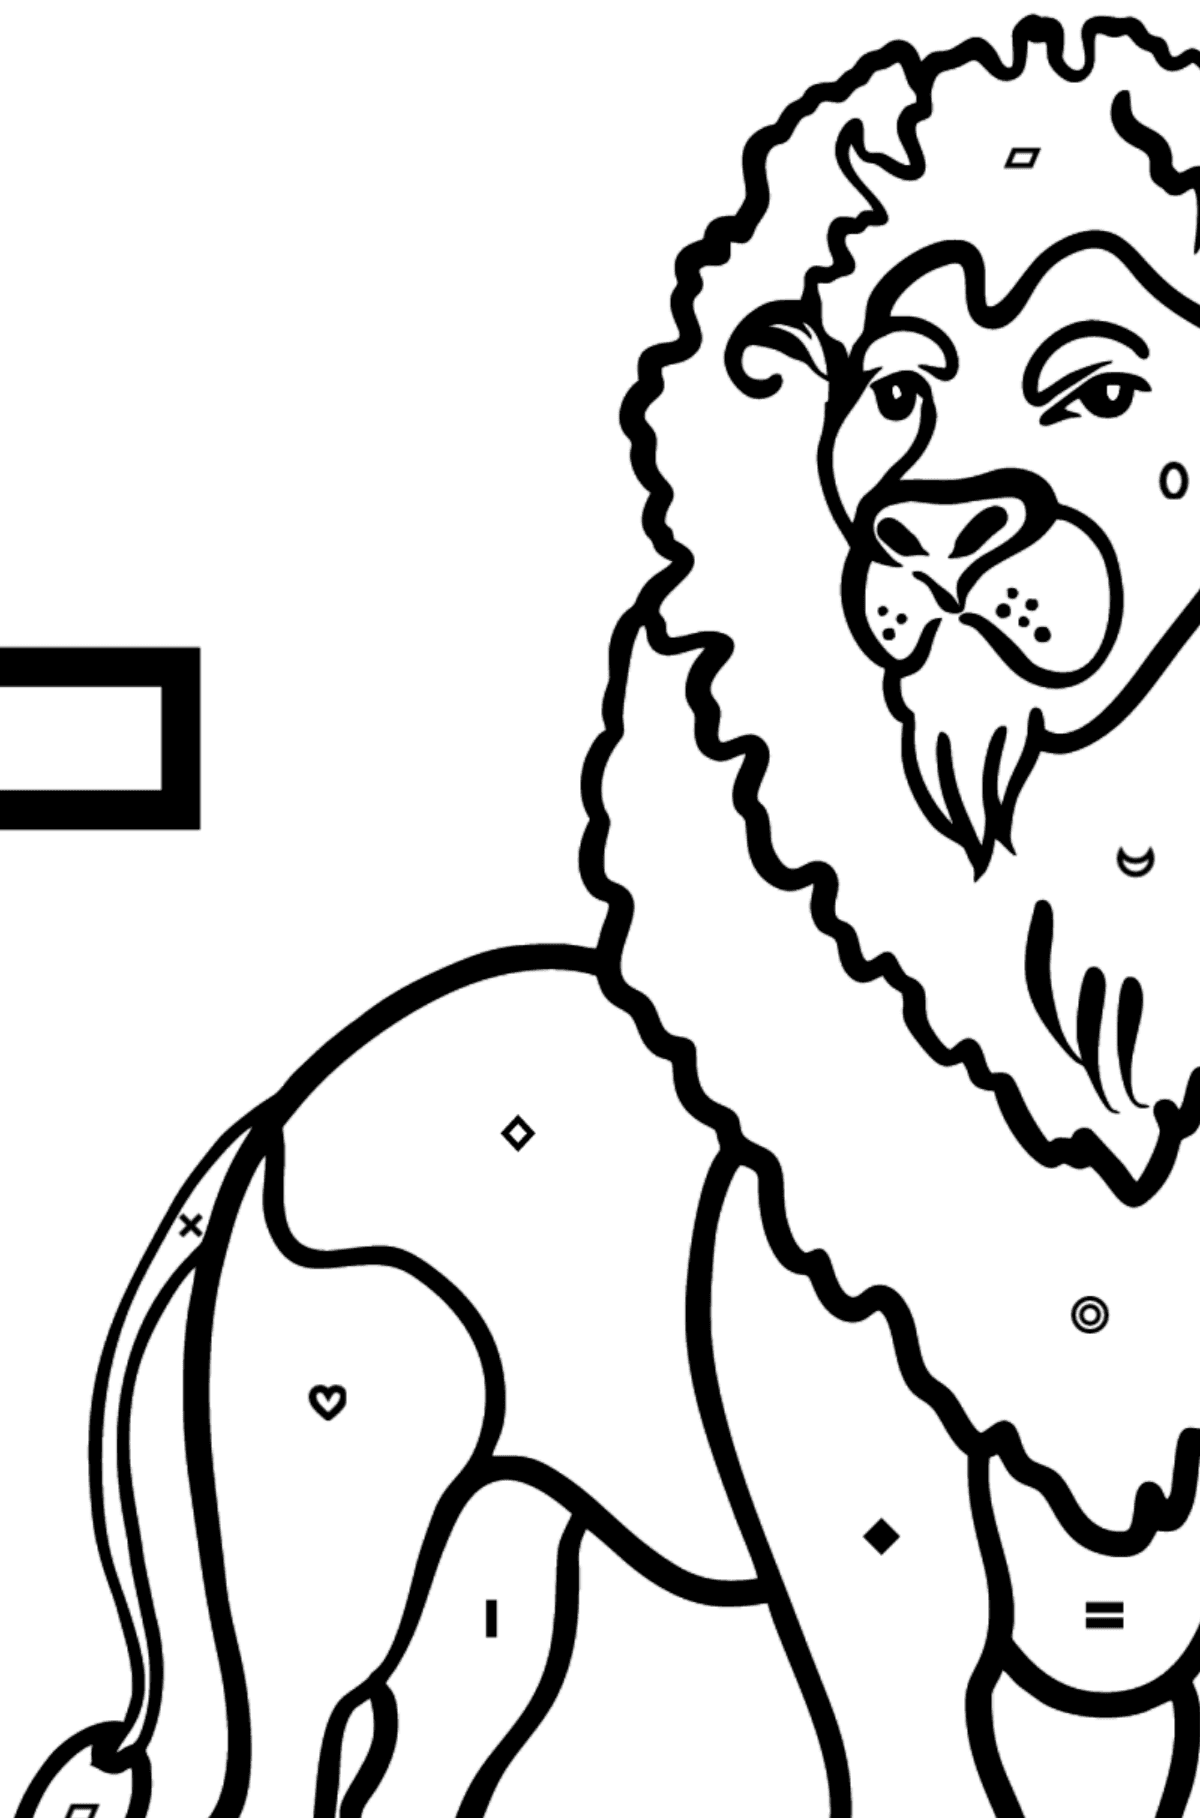 Spanish Letter L coloring pages - LEON - Coloring by Symbols and Geometric Shapes for Kids